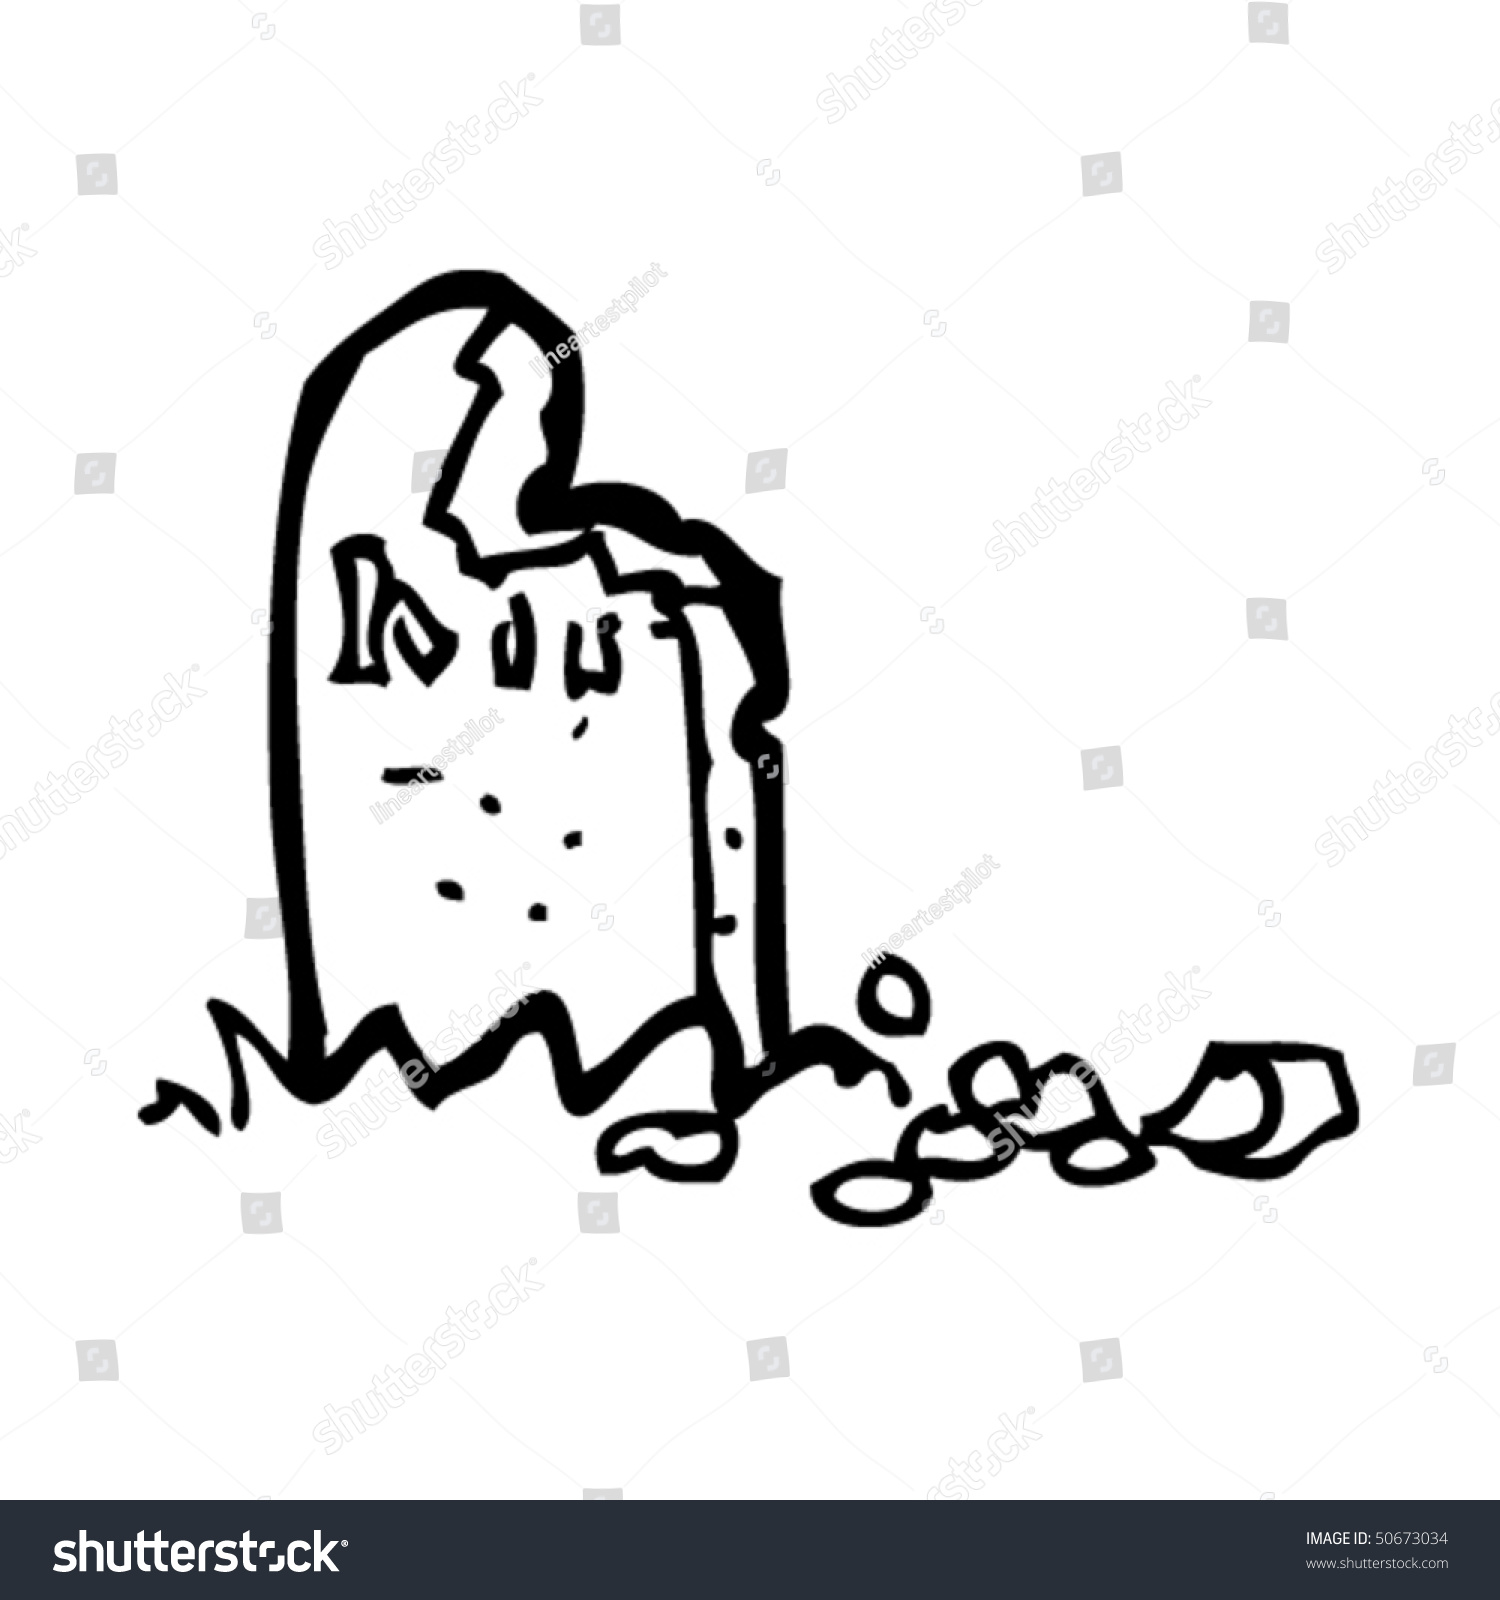 Quirky Drawing Of A Crumbling Grave Stock Vector Illustration 50673034